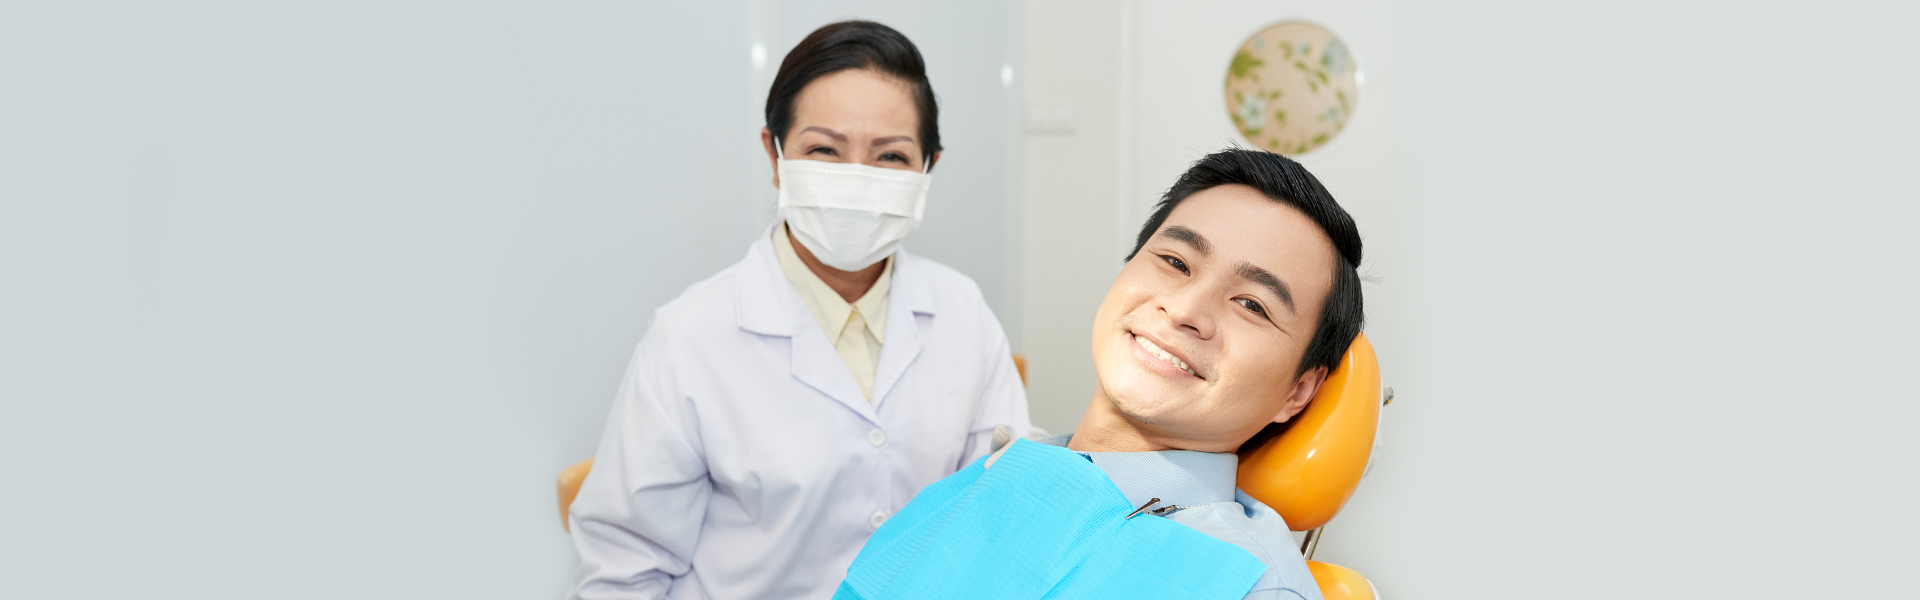 Dental Exams and Cleanings a Preventive Measure for Your Oral Health